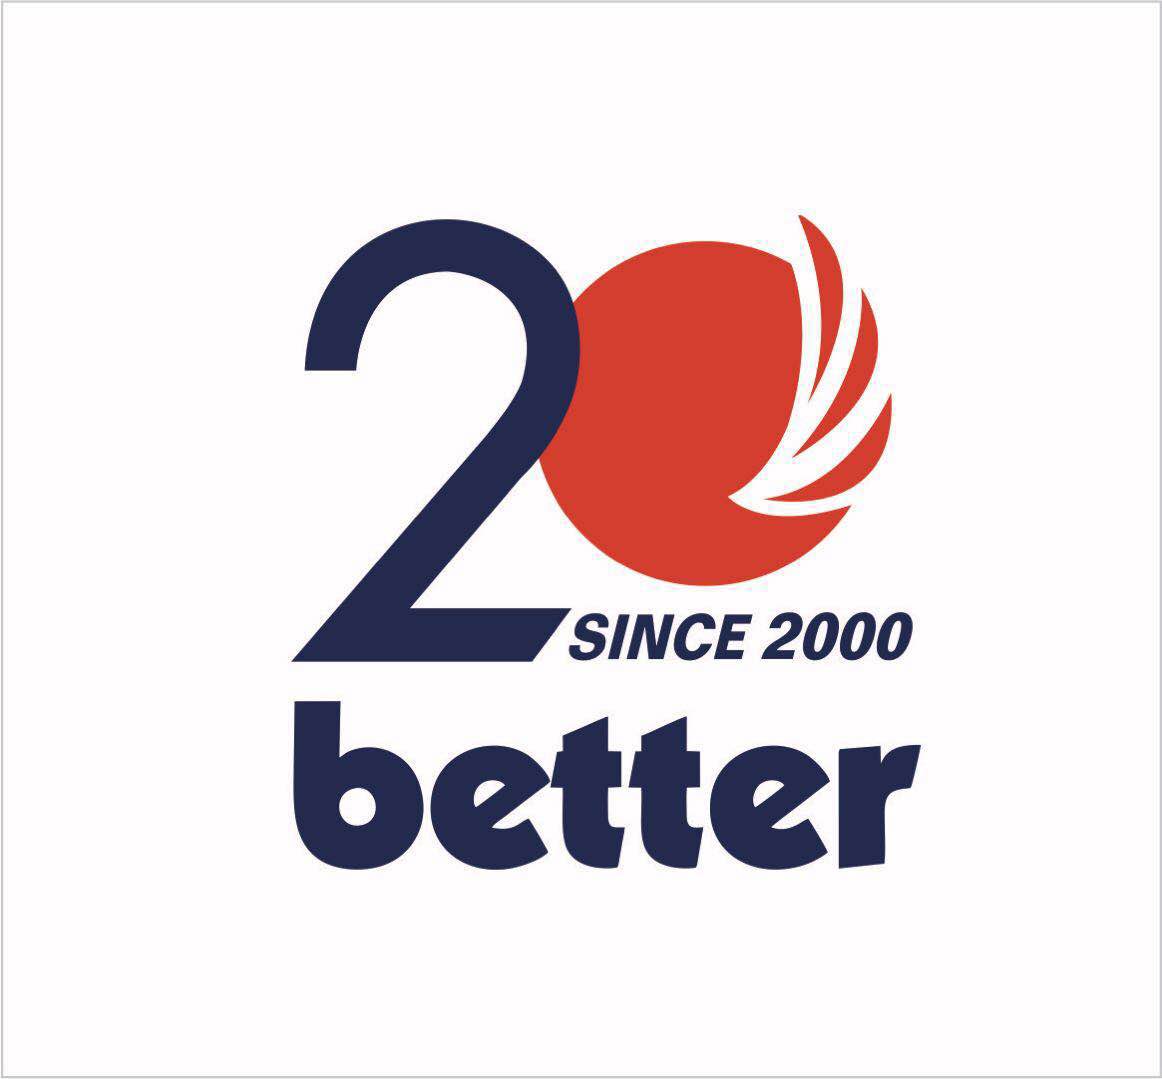 Warm congratulations to the 20th anniversary of the establishment of Better New Materials!